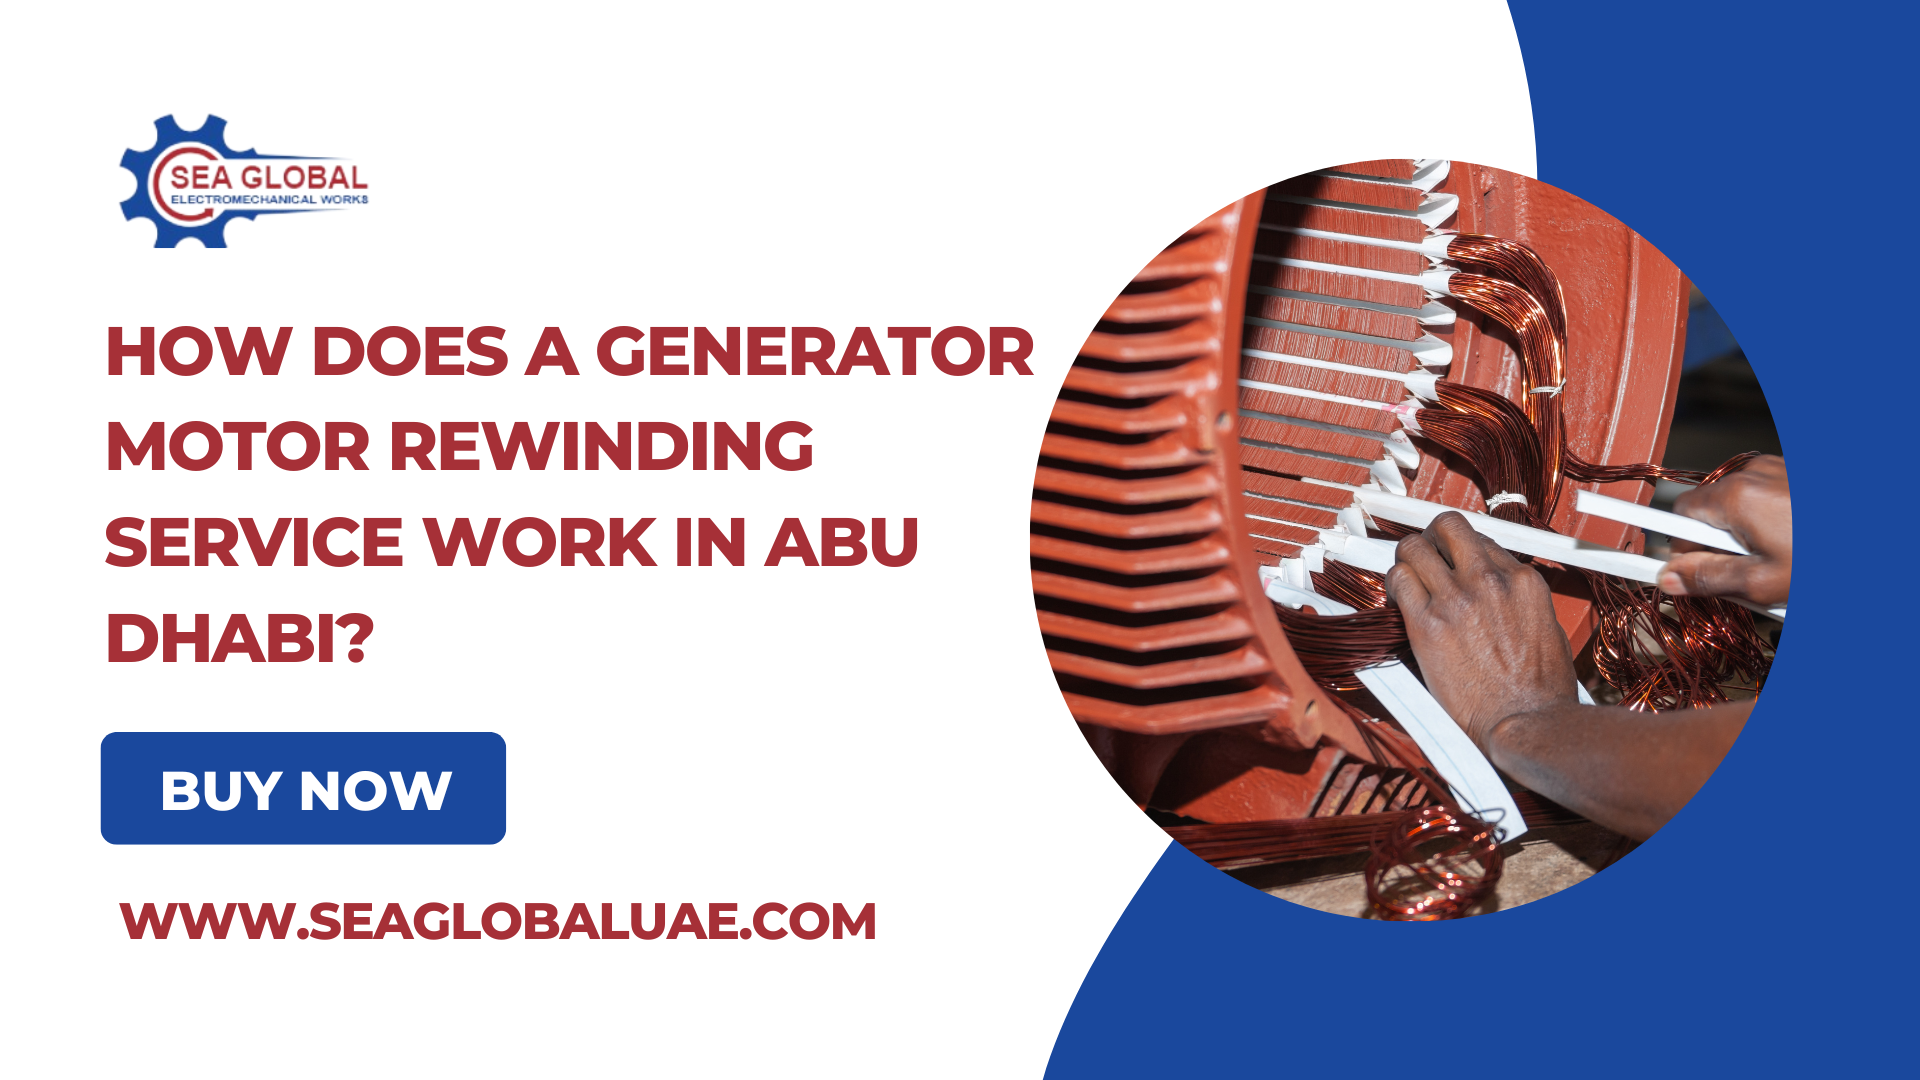 How Does a Generator Motor Rewinding Service Work in Abu Dhabi?